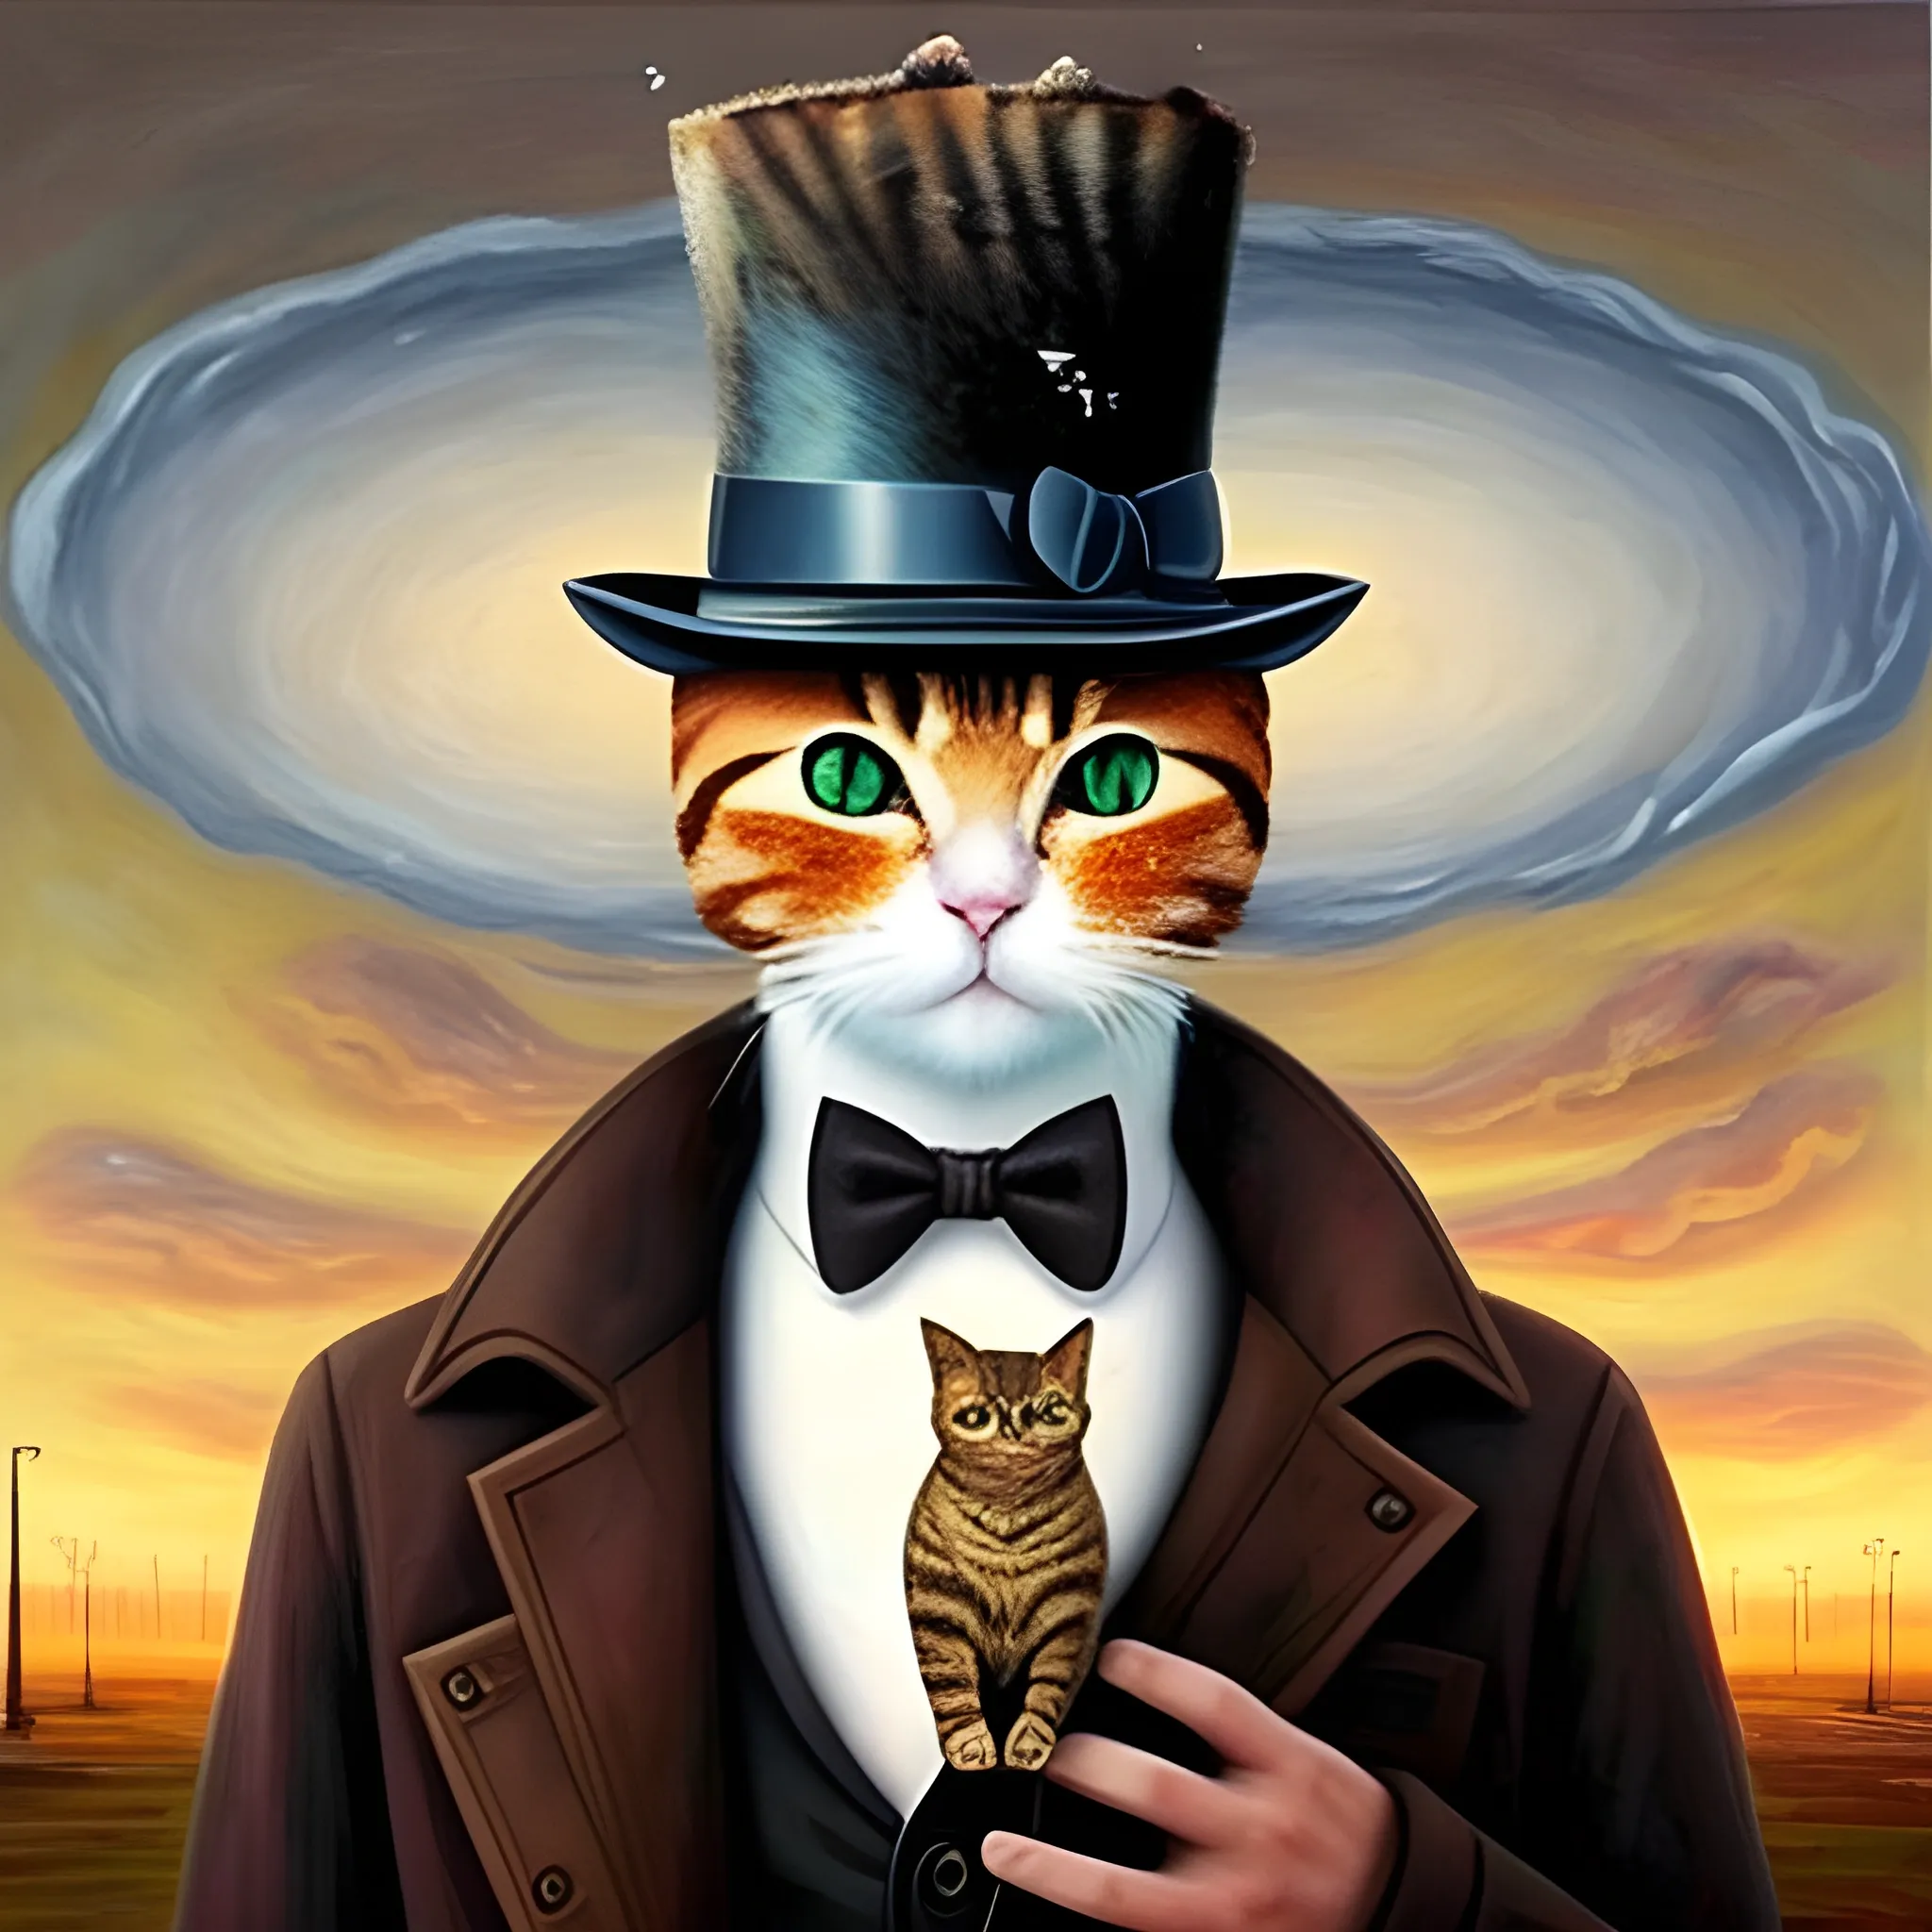 an humanoid cat whit a coat, a nuclear explotion in the background, the cat has a hat, realistic, cinematografic ,Oil Painting, the cat has a cigarrete